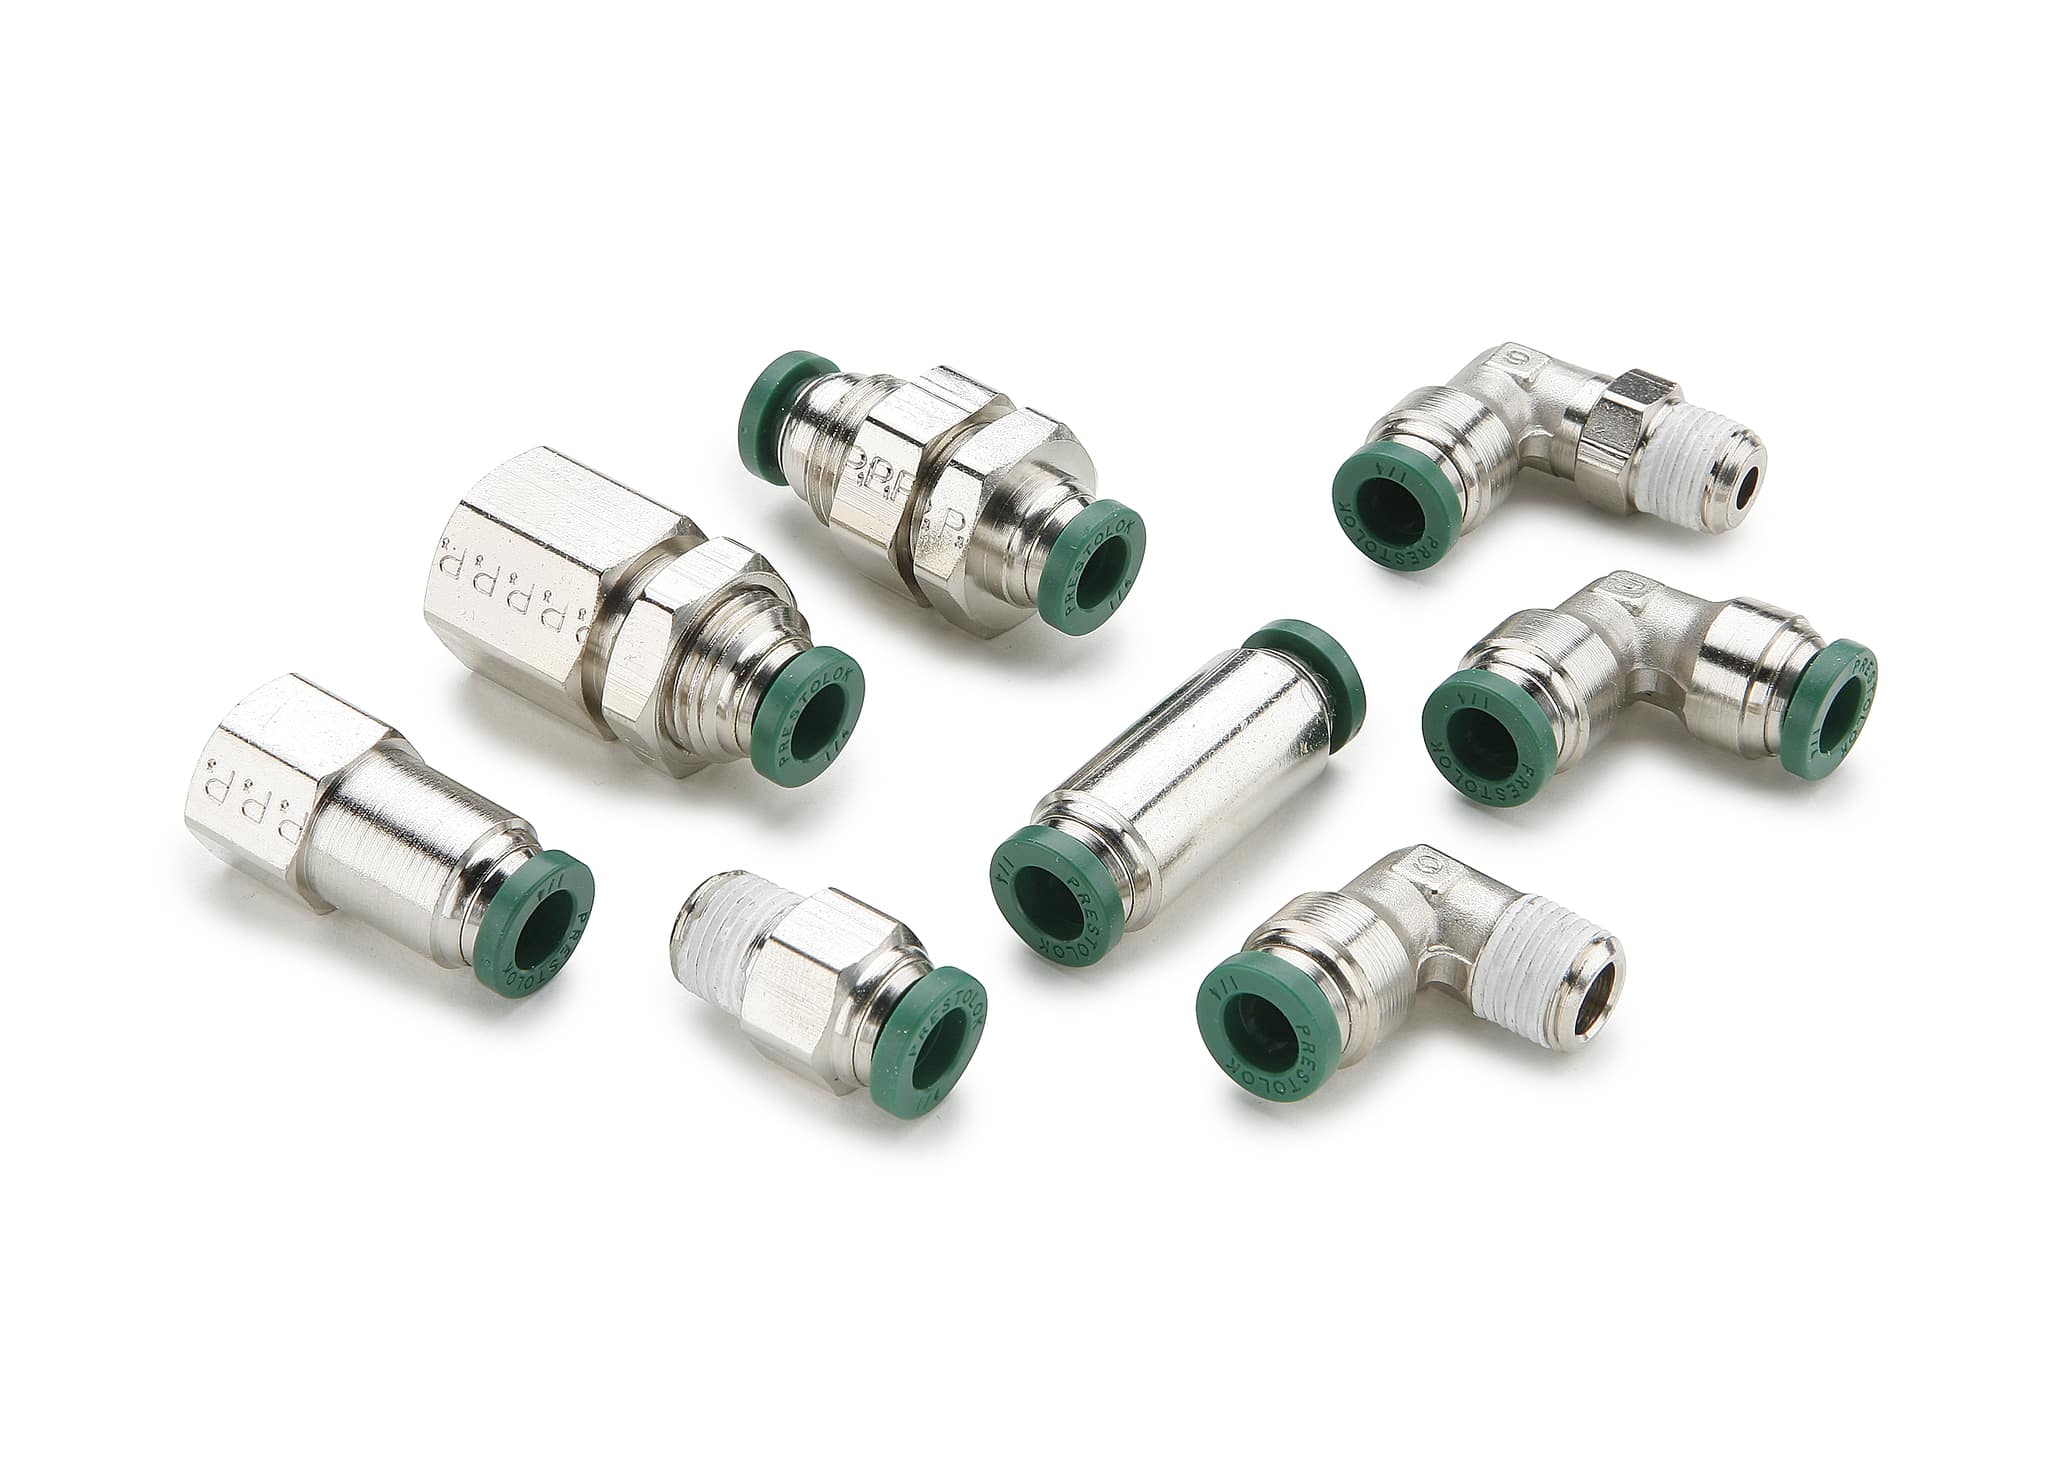 Pneumatic Push-to-Connect Fittings